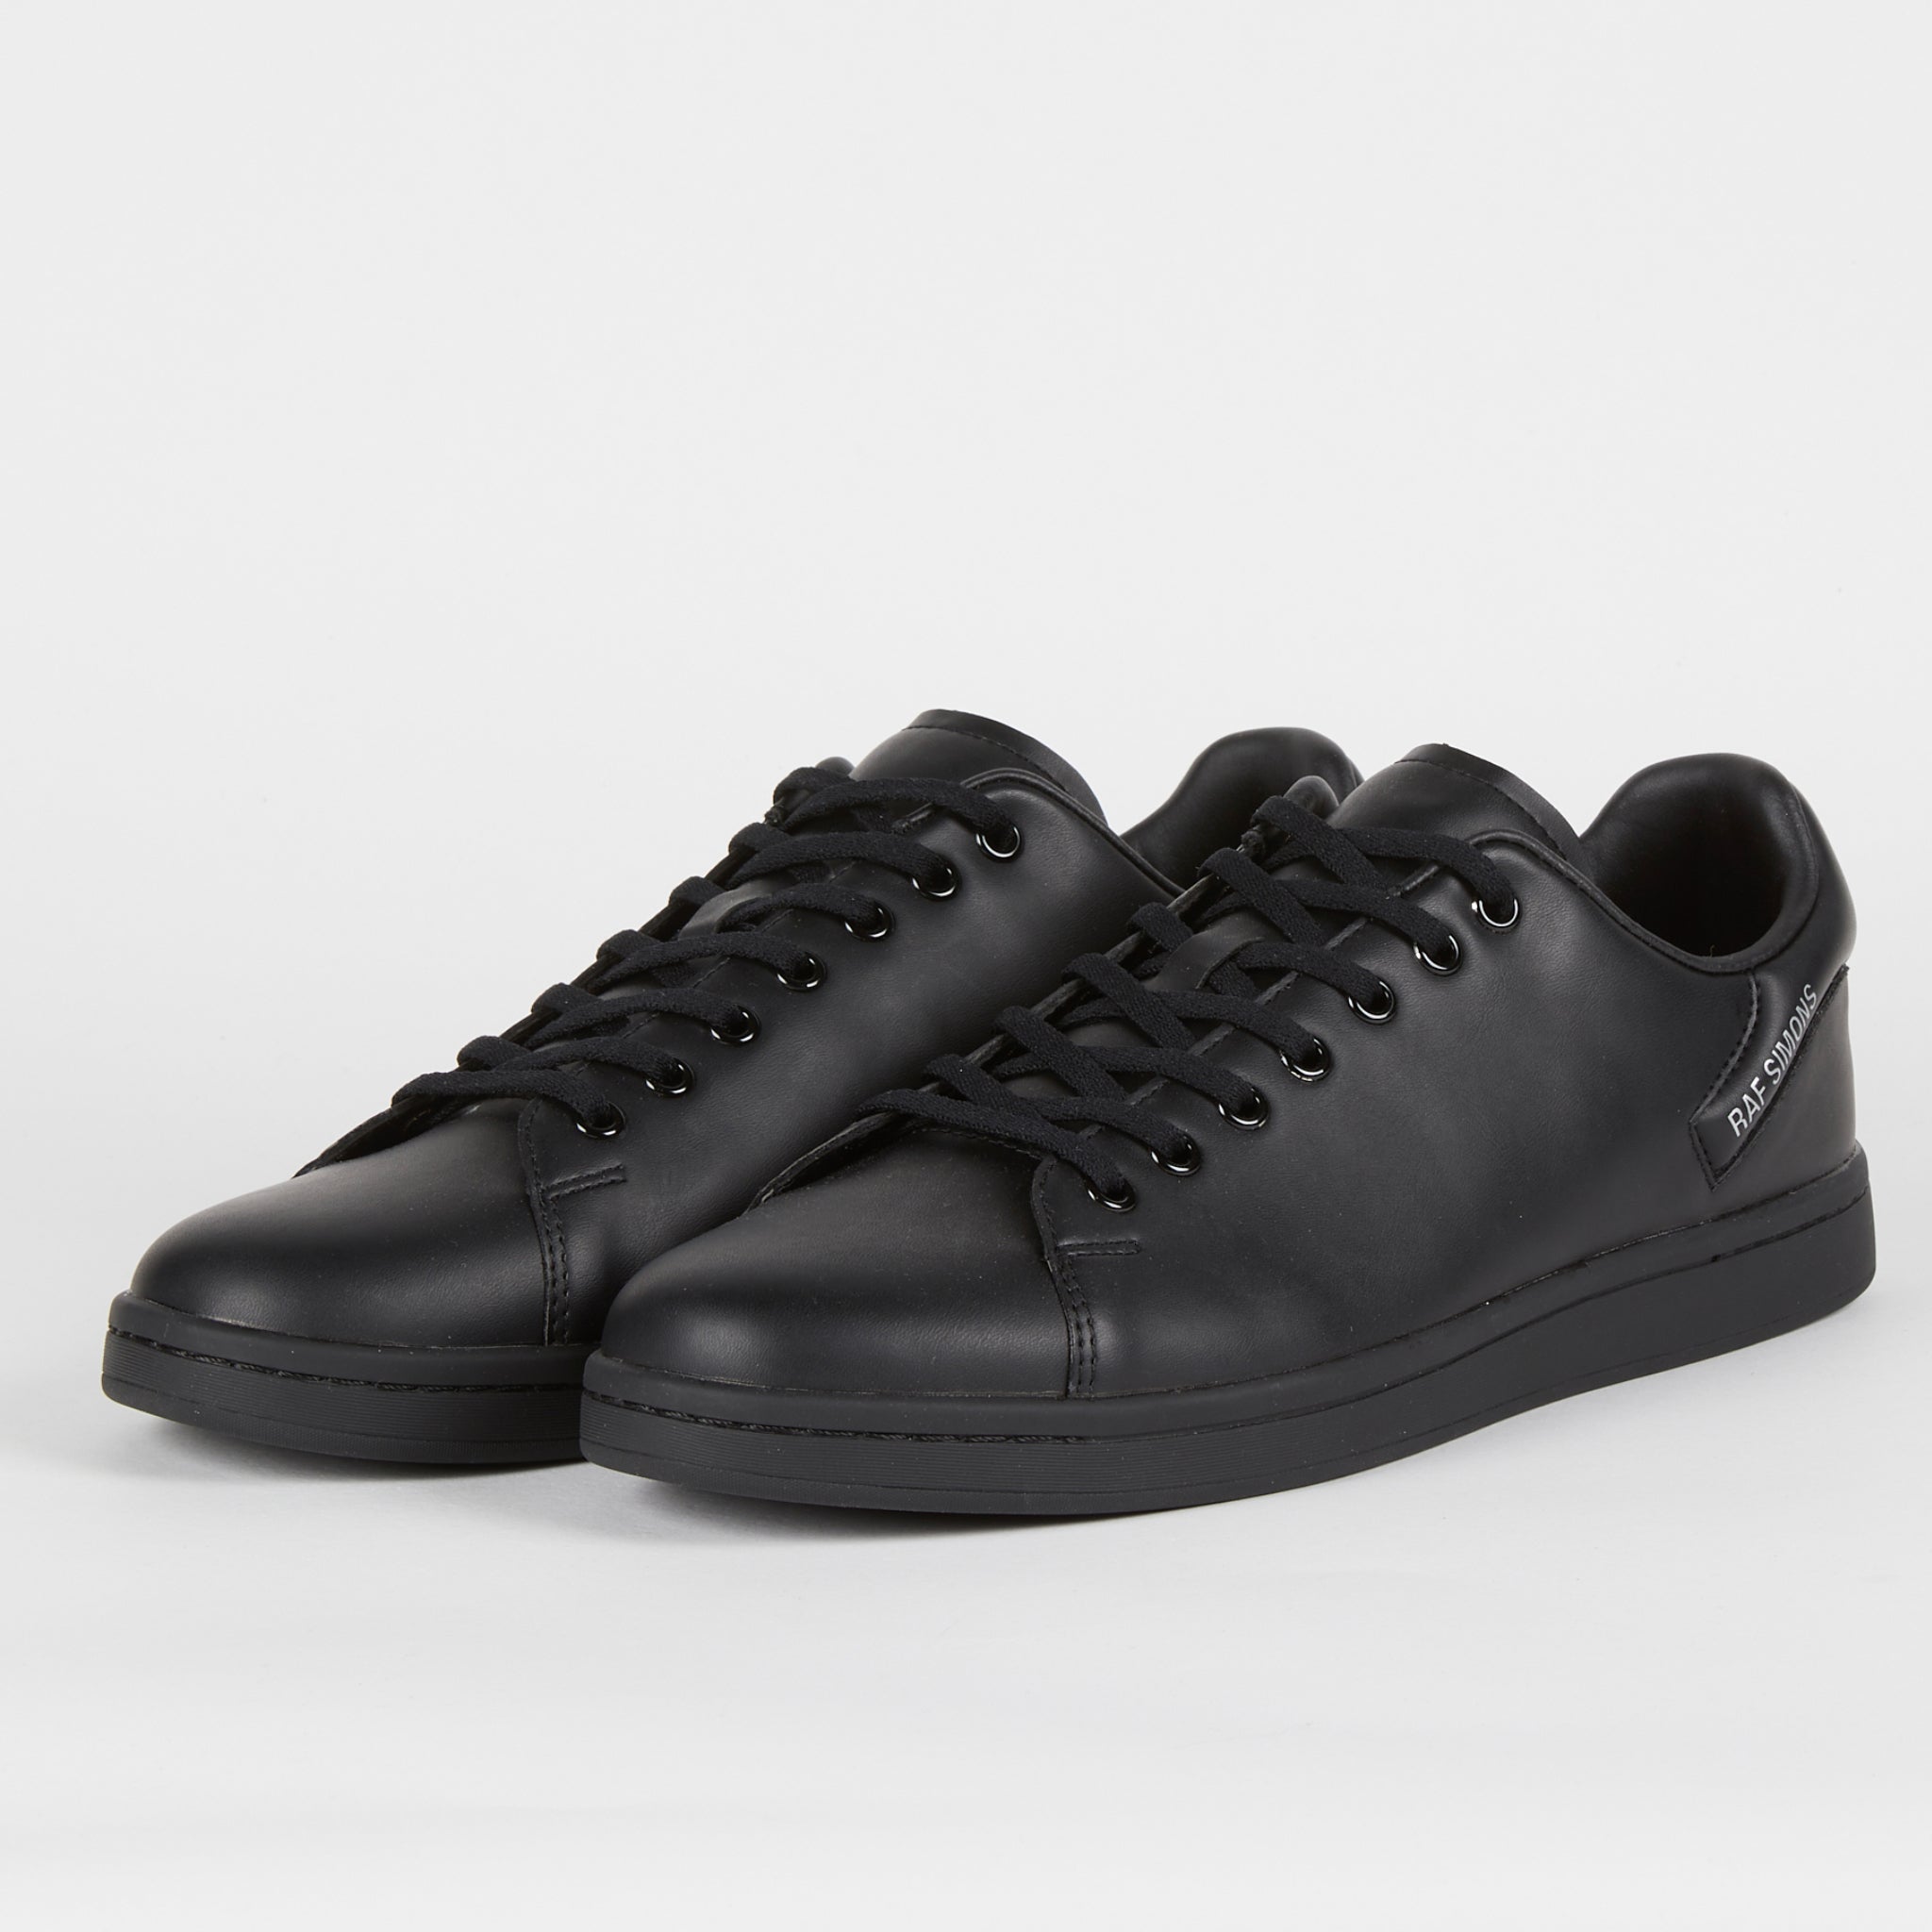 RAF SIMONS RUNNER ORION BLACK SNEAKERS – SECTS SHOP